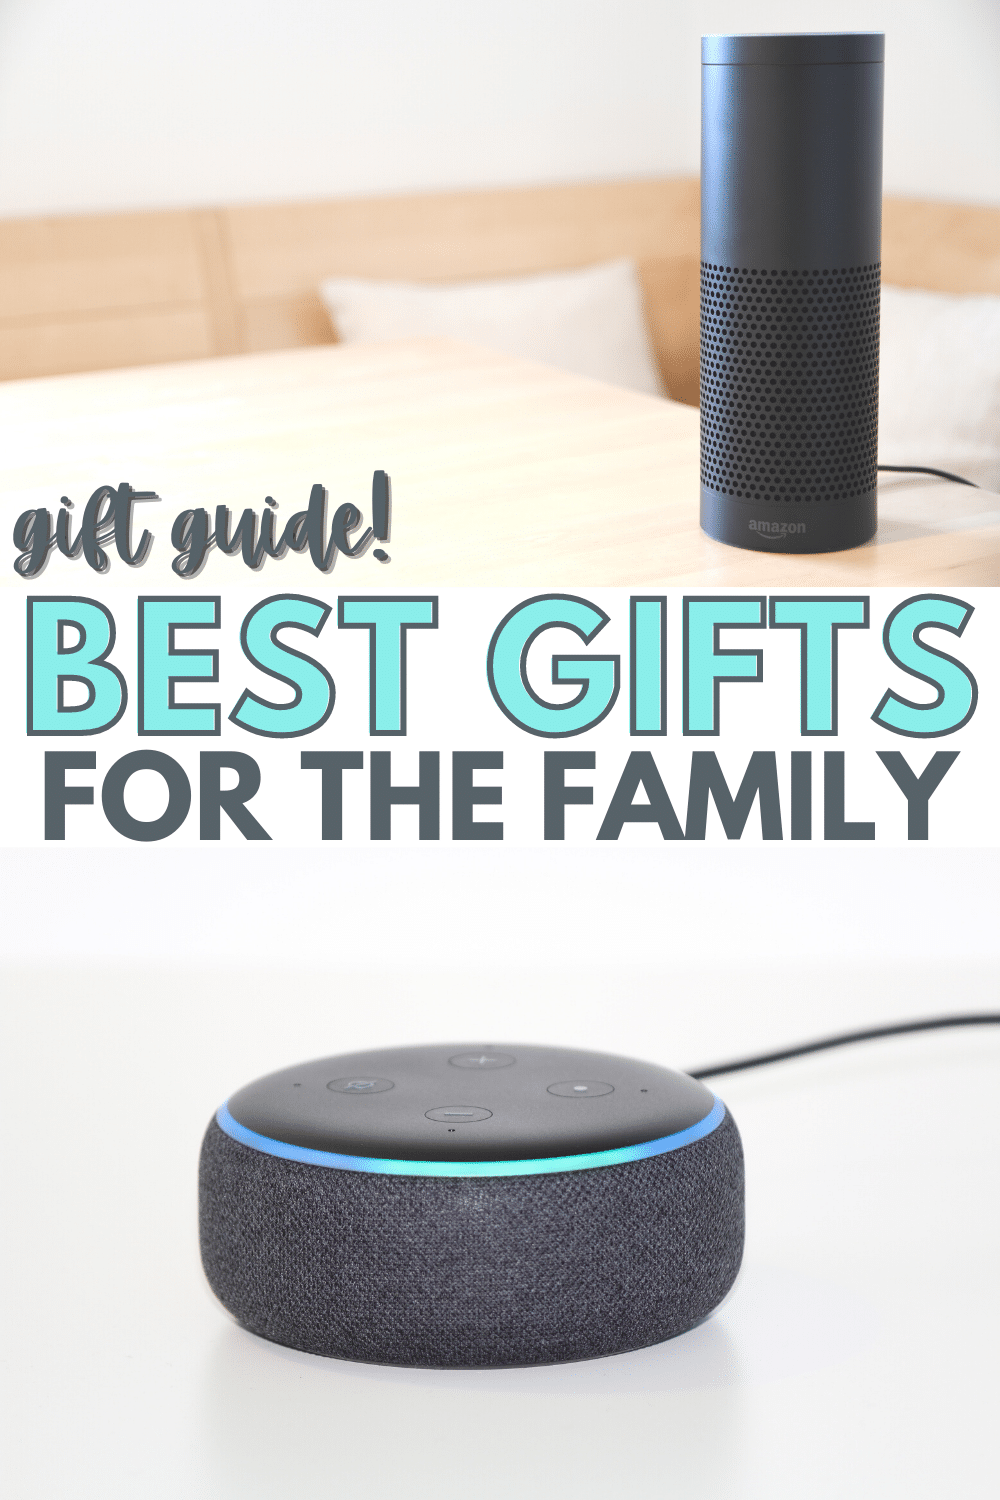 Finding a gift for an entire family can be difficult. These best family gift ideas will please everyone from the youngest child to mom and dad. #giftguide #giftideas #familygift via @wondermomwannab